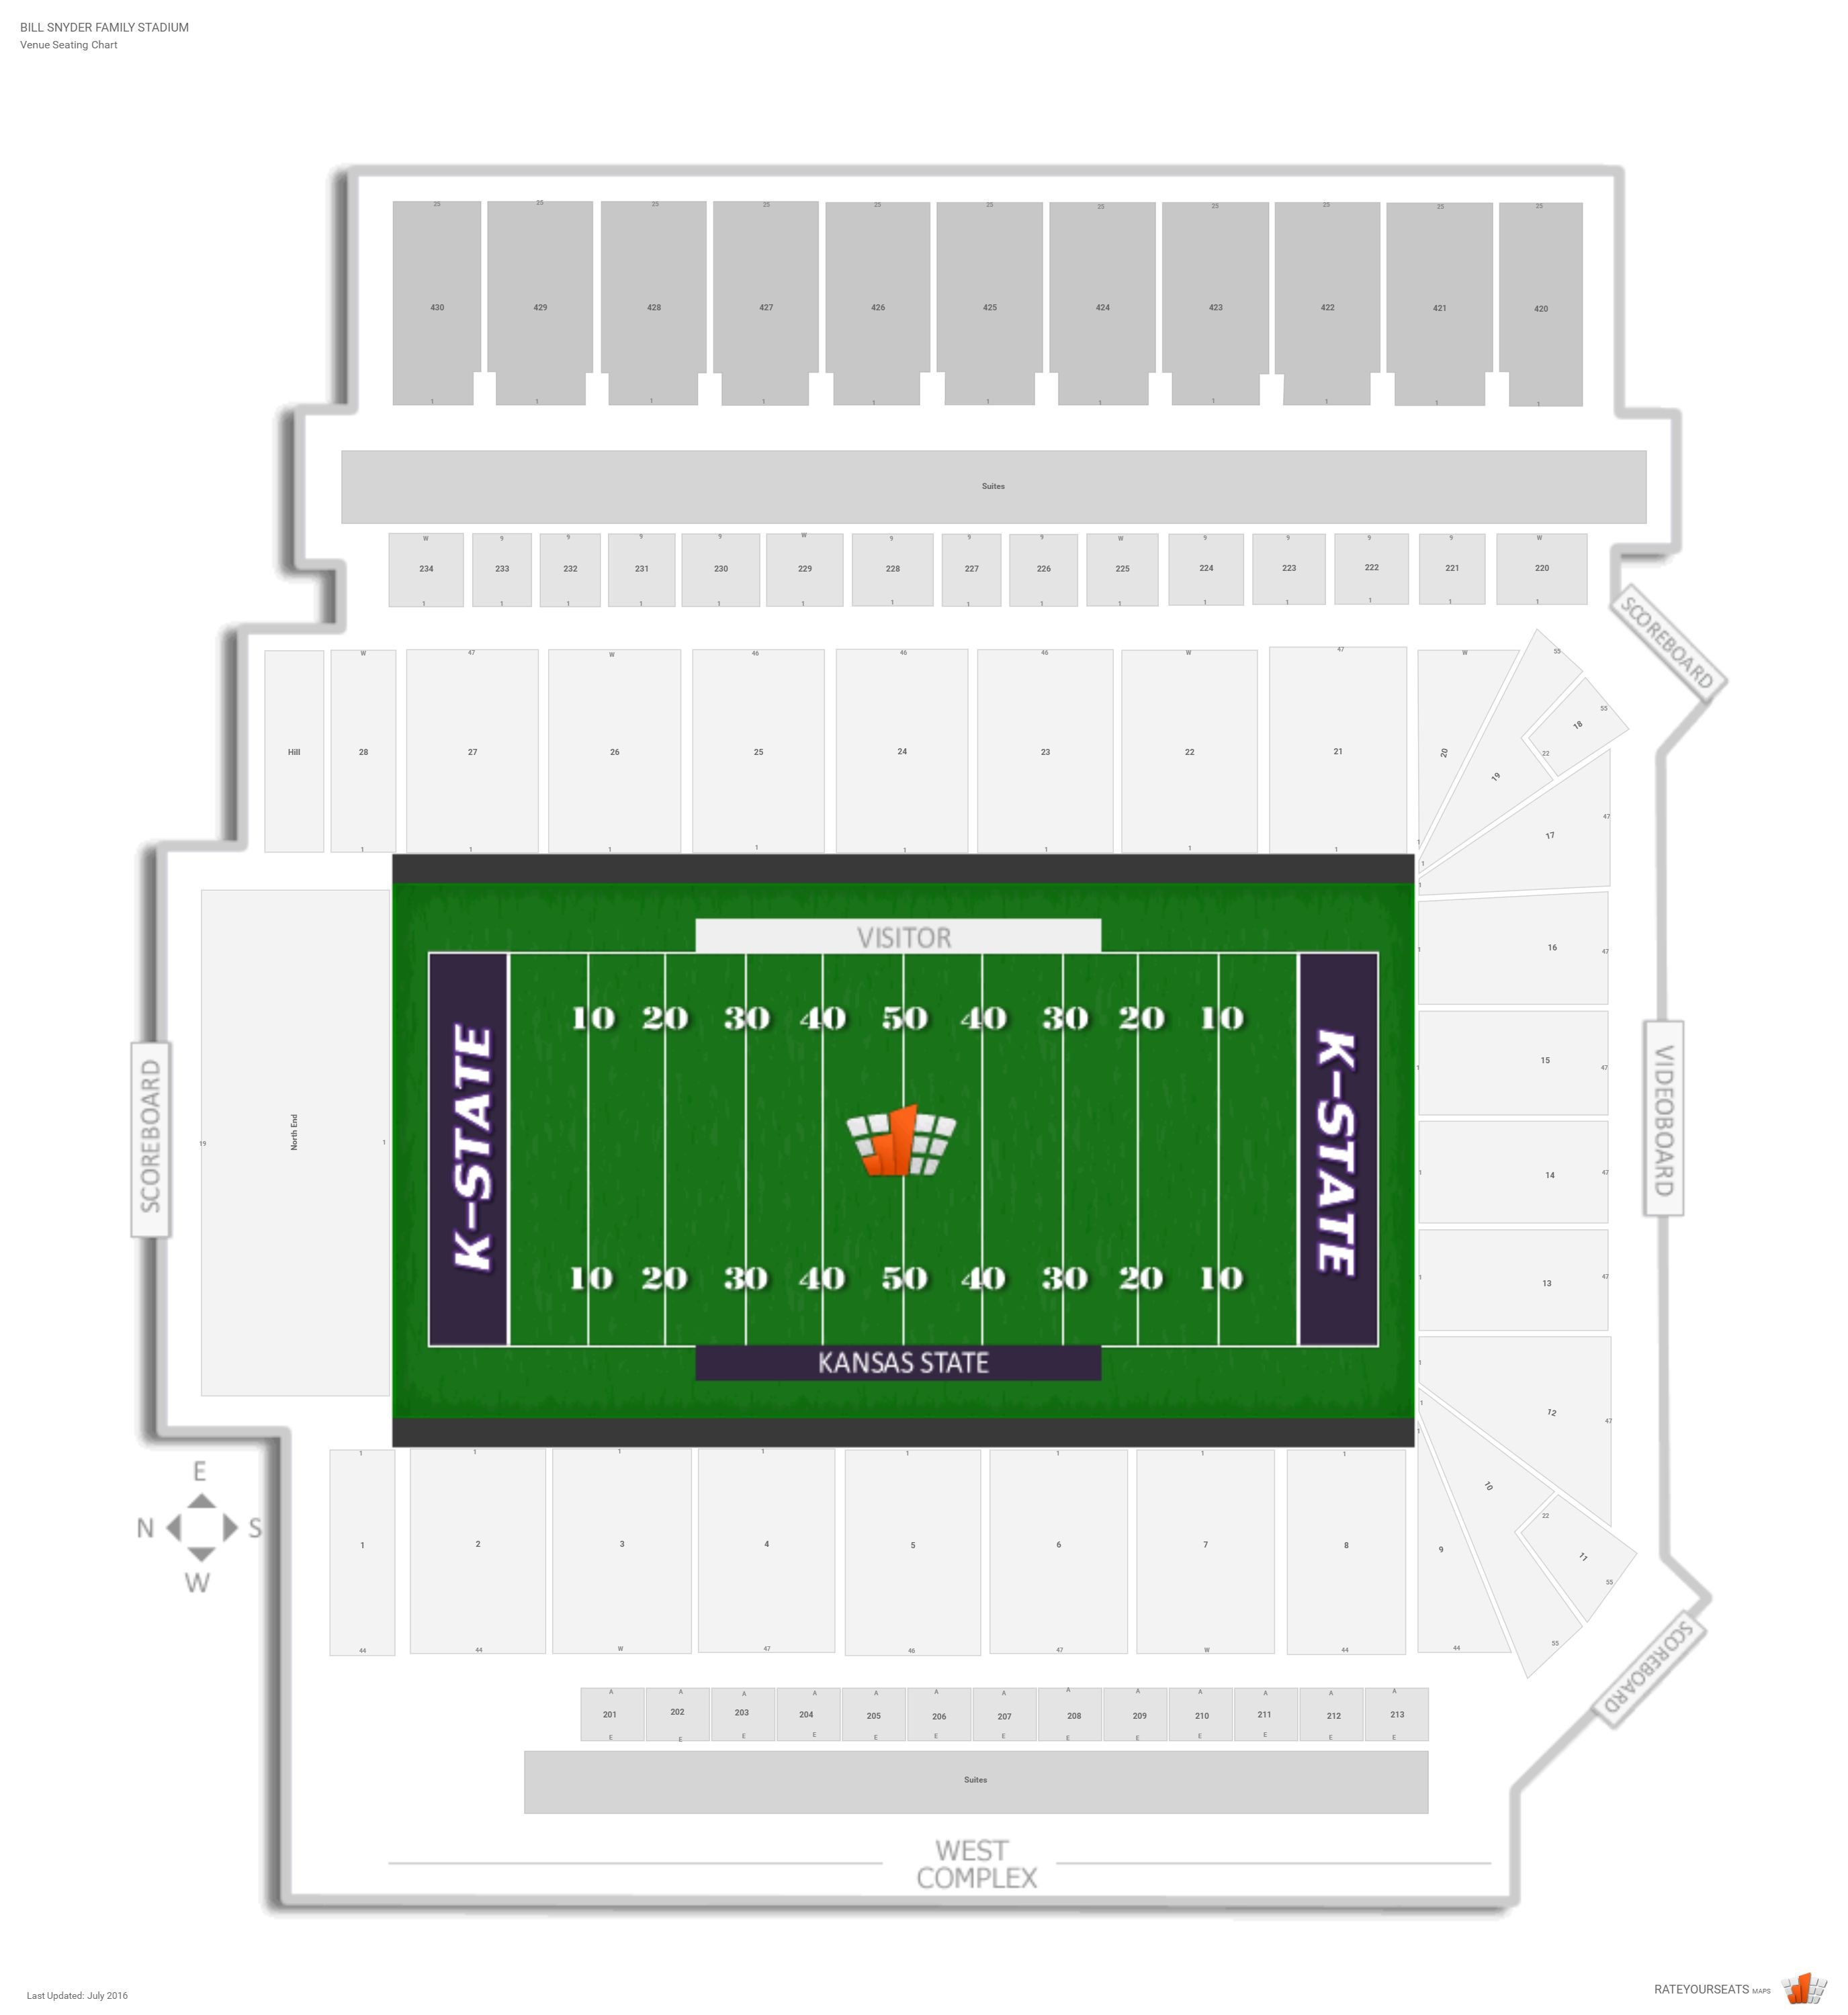 Snyder Family Stadium Seating Chart